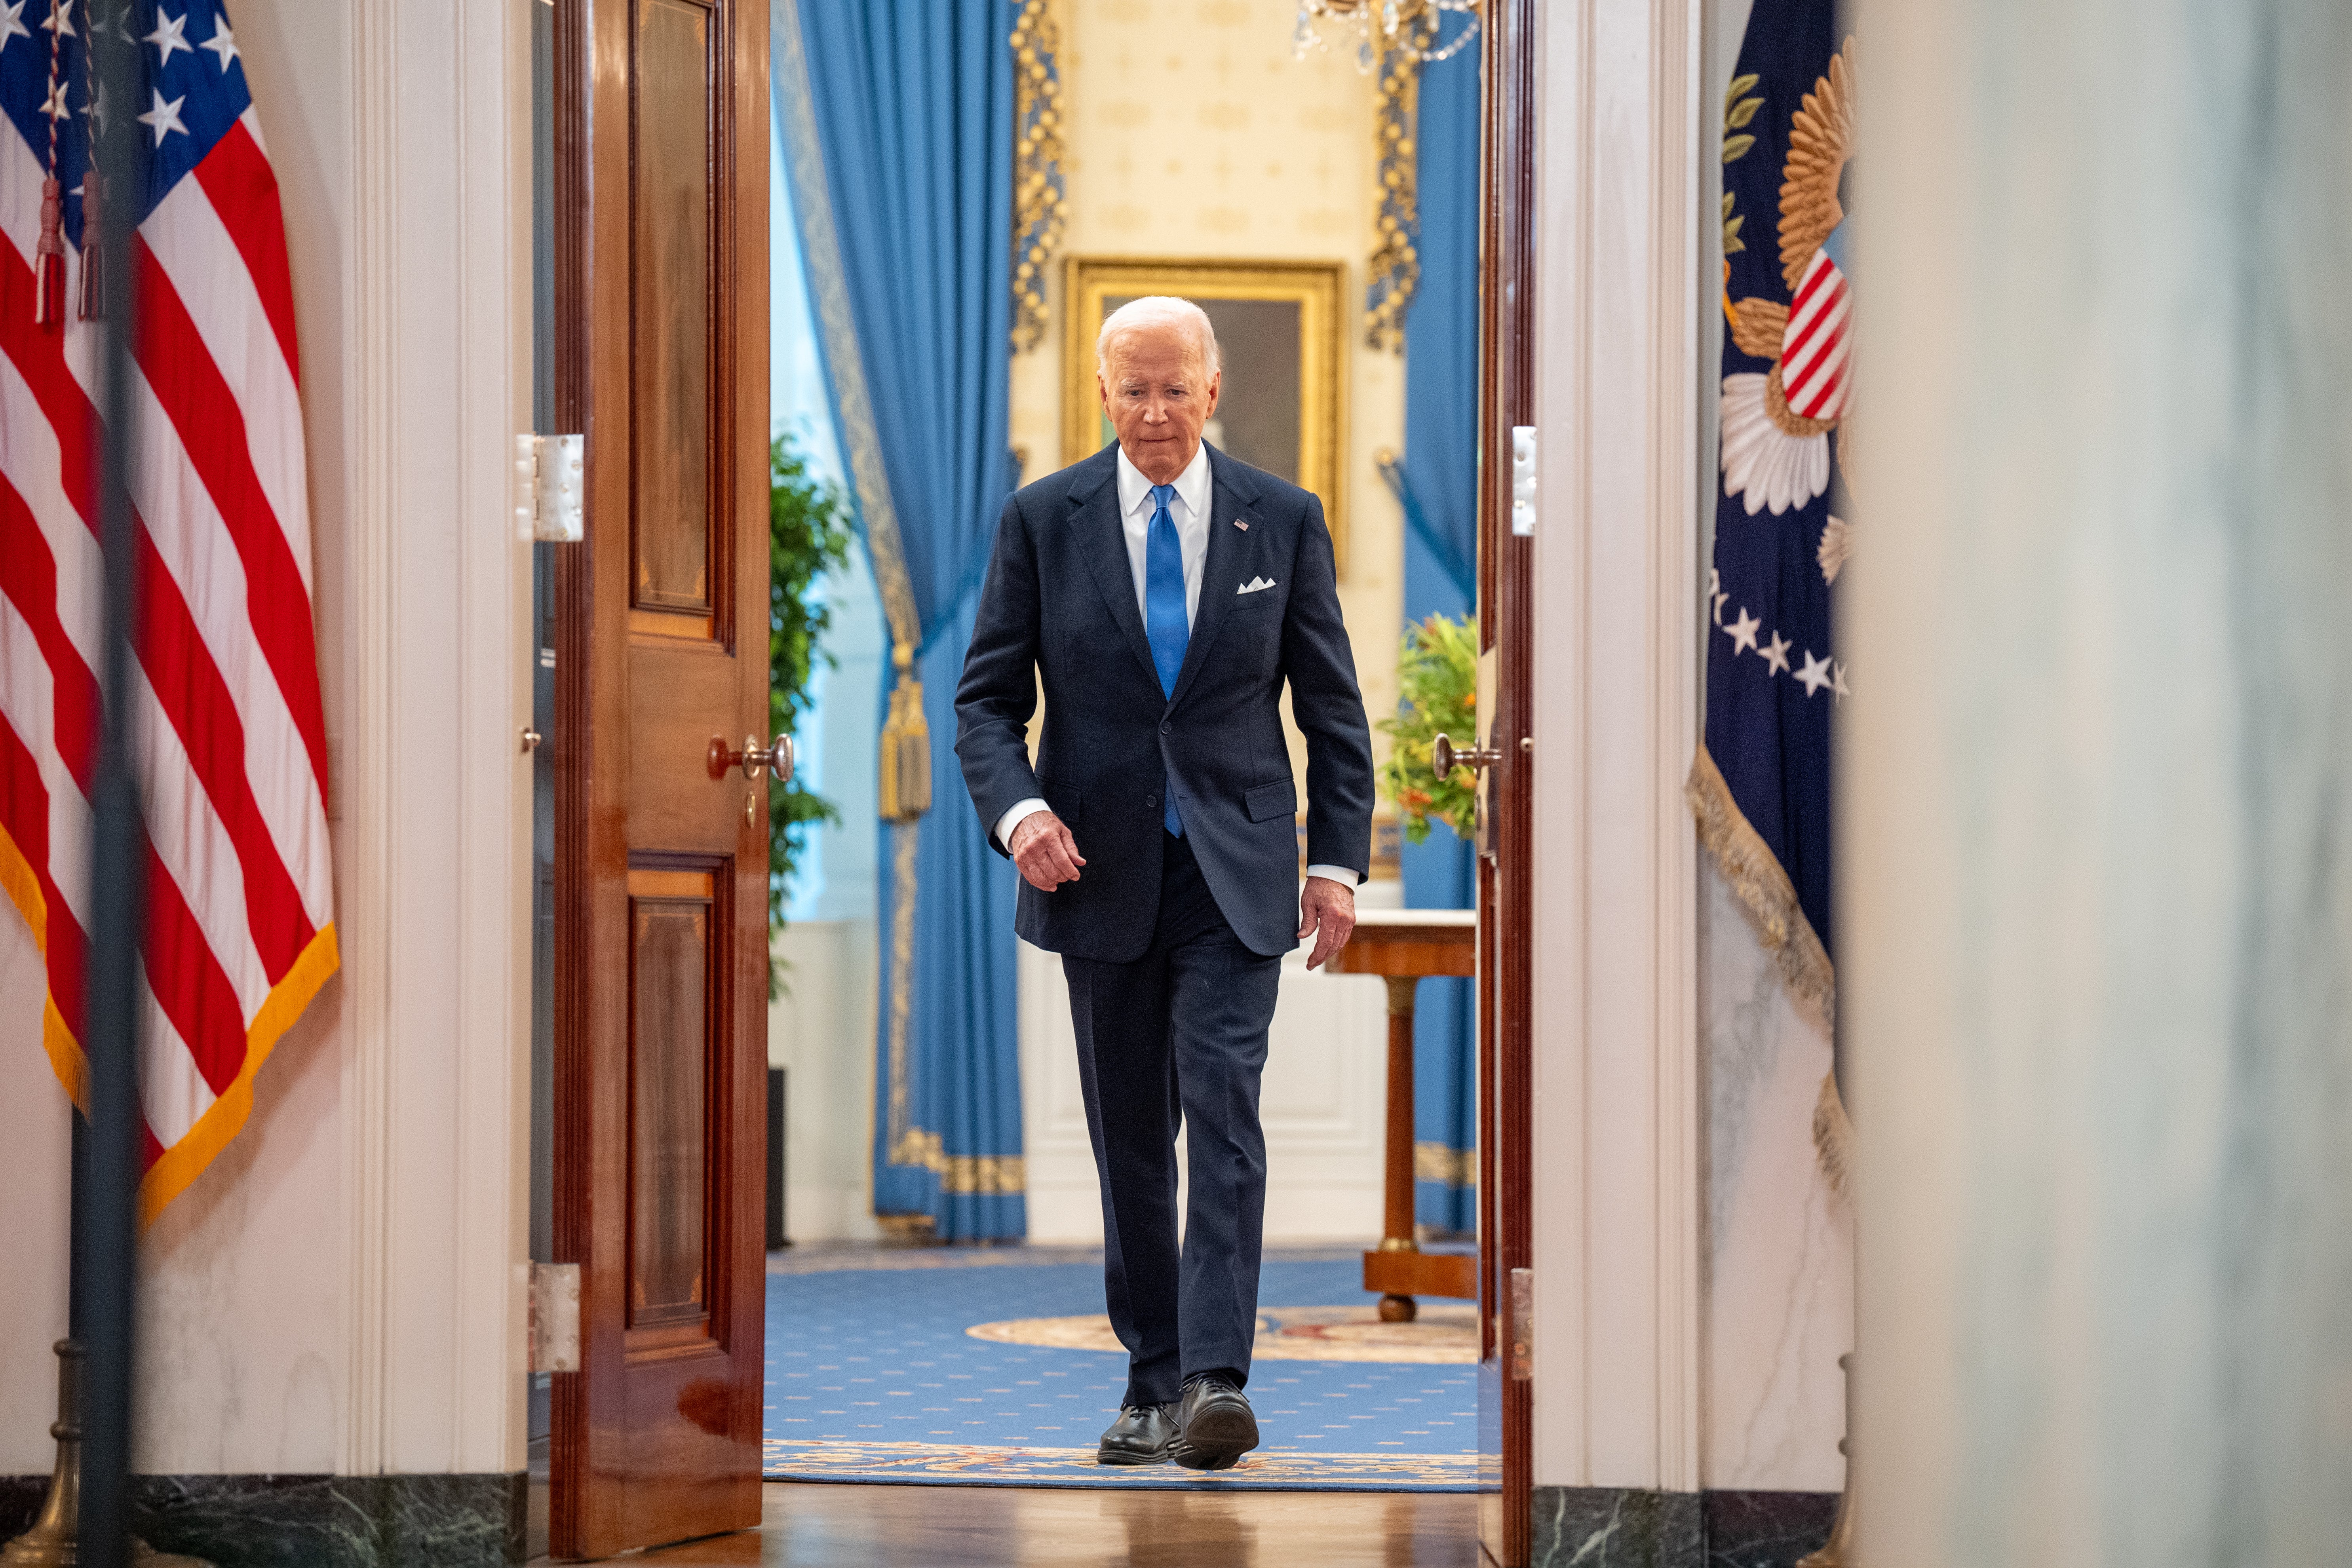 President Joe Biden, pictured on July 1. There were mixed signals about the future of his 2024 campaign following a disastrous debate performance last week